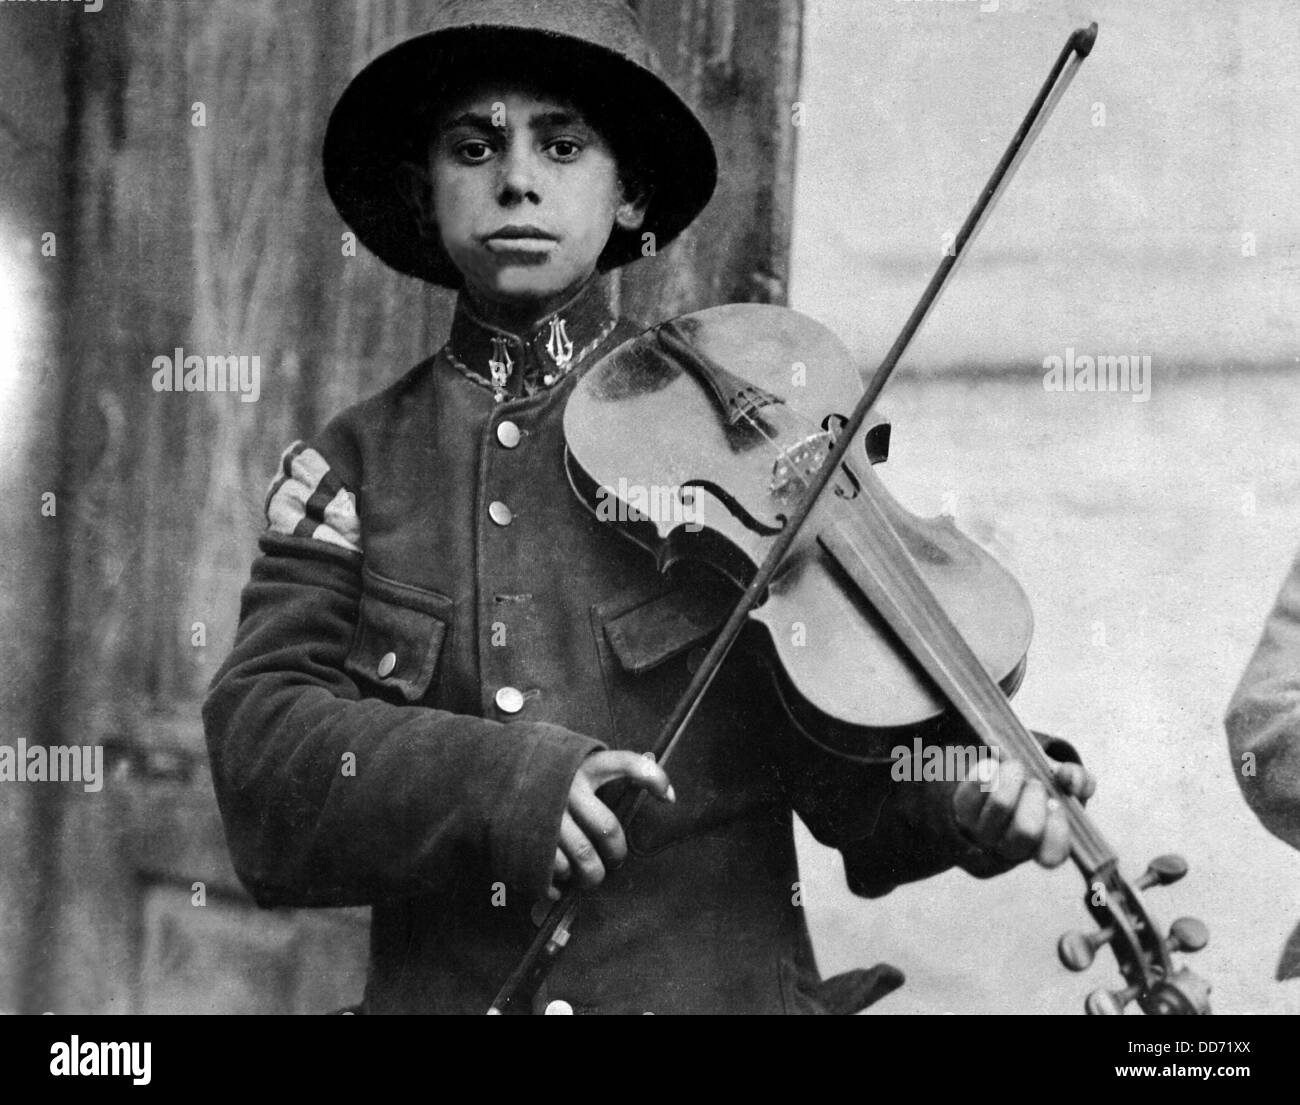 A young Christmas street fiddler, Belgrade, Serbia. Photo by Lewis Hine. Dec. 1918. Stock Photo